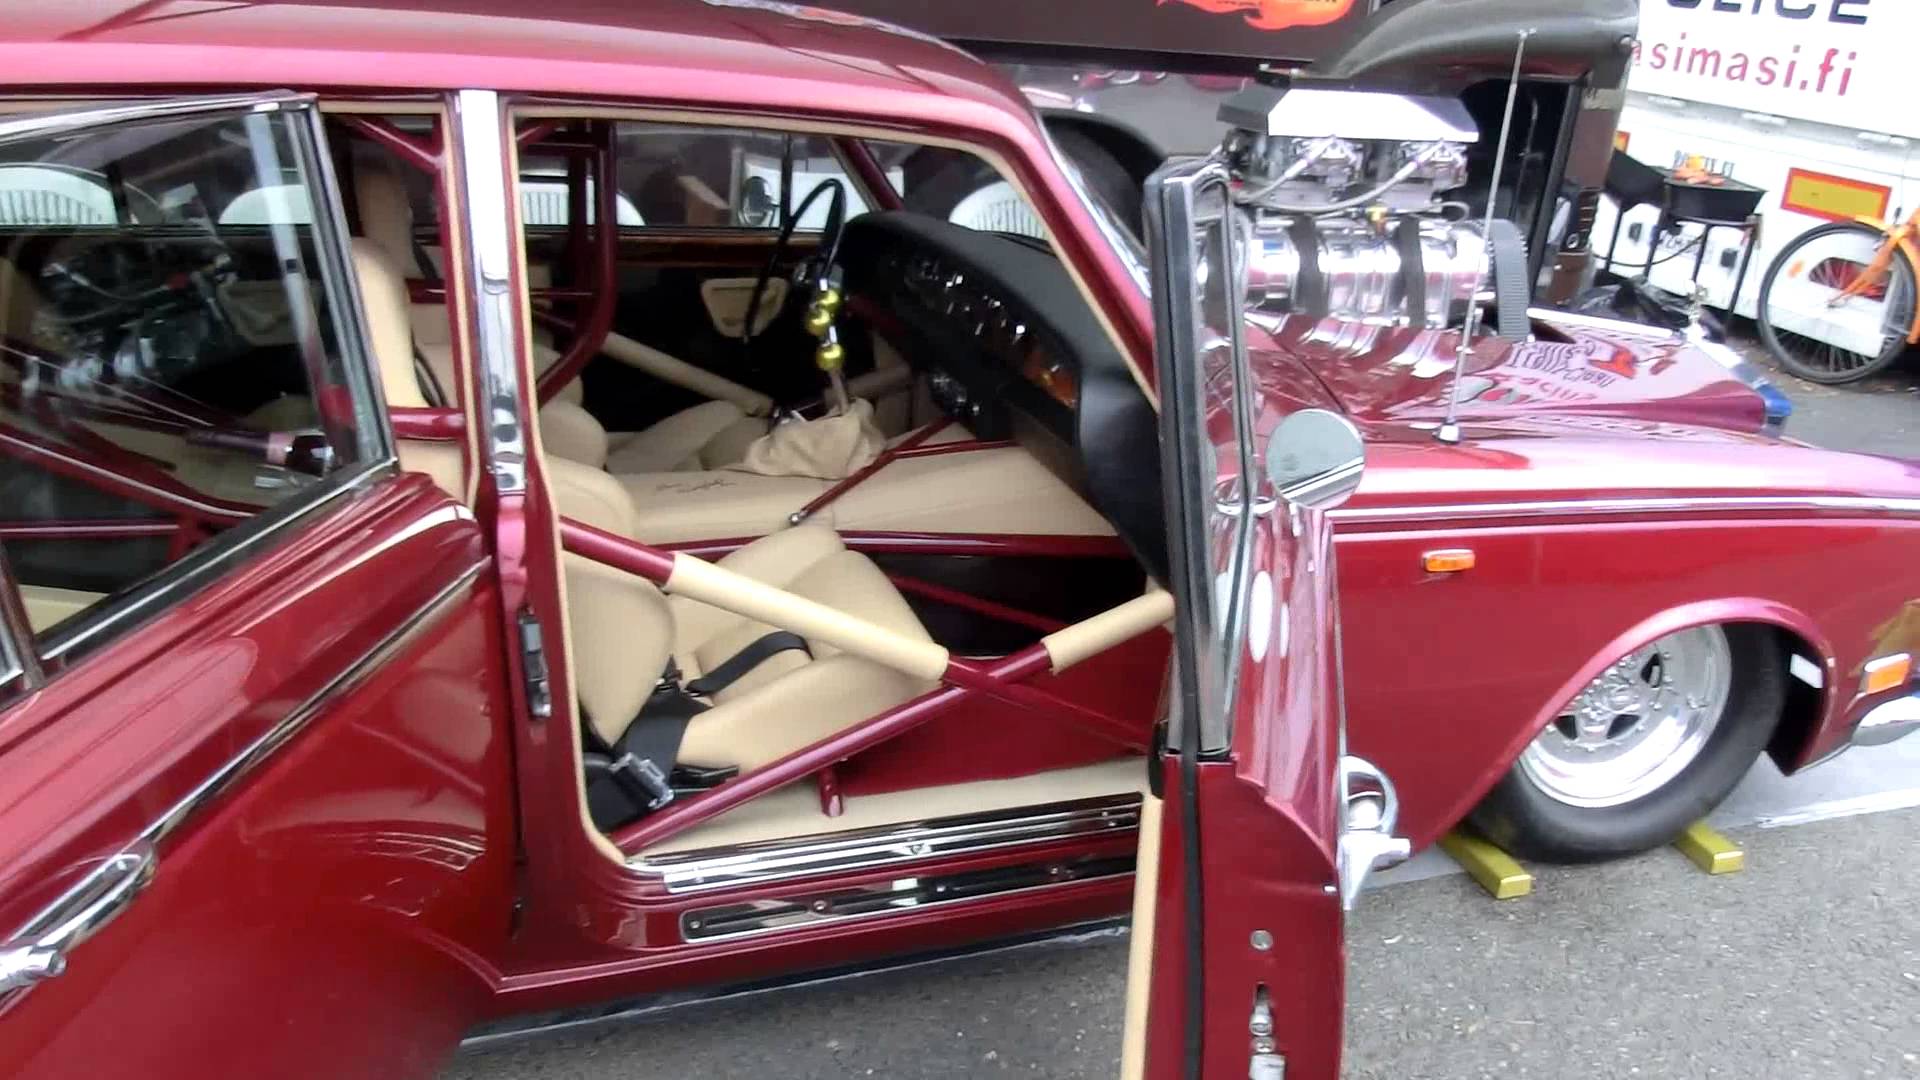 The Ridiculousness of This Rolls Royce Is Well, Ridiculous